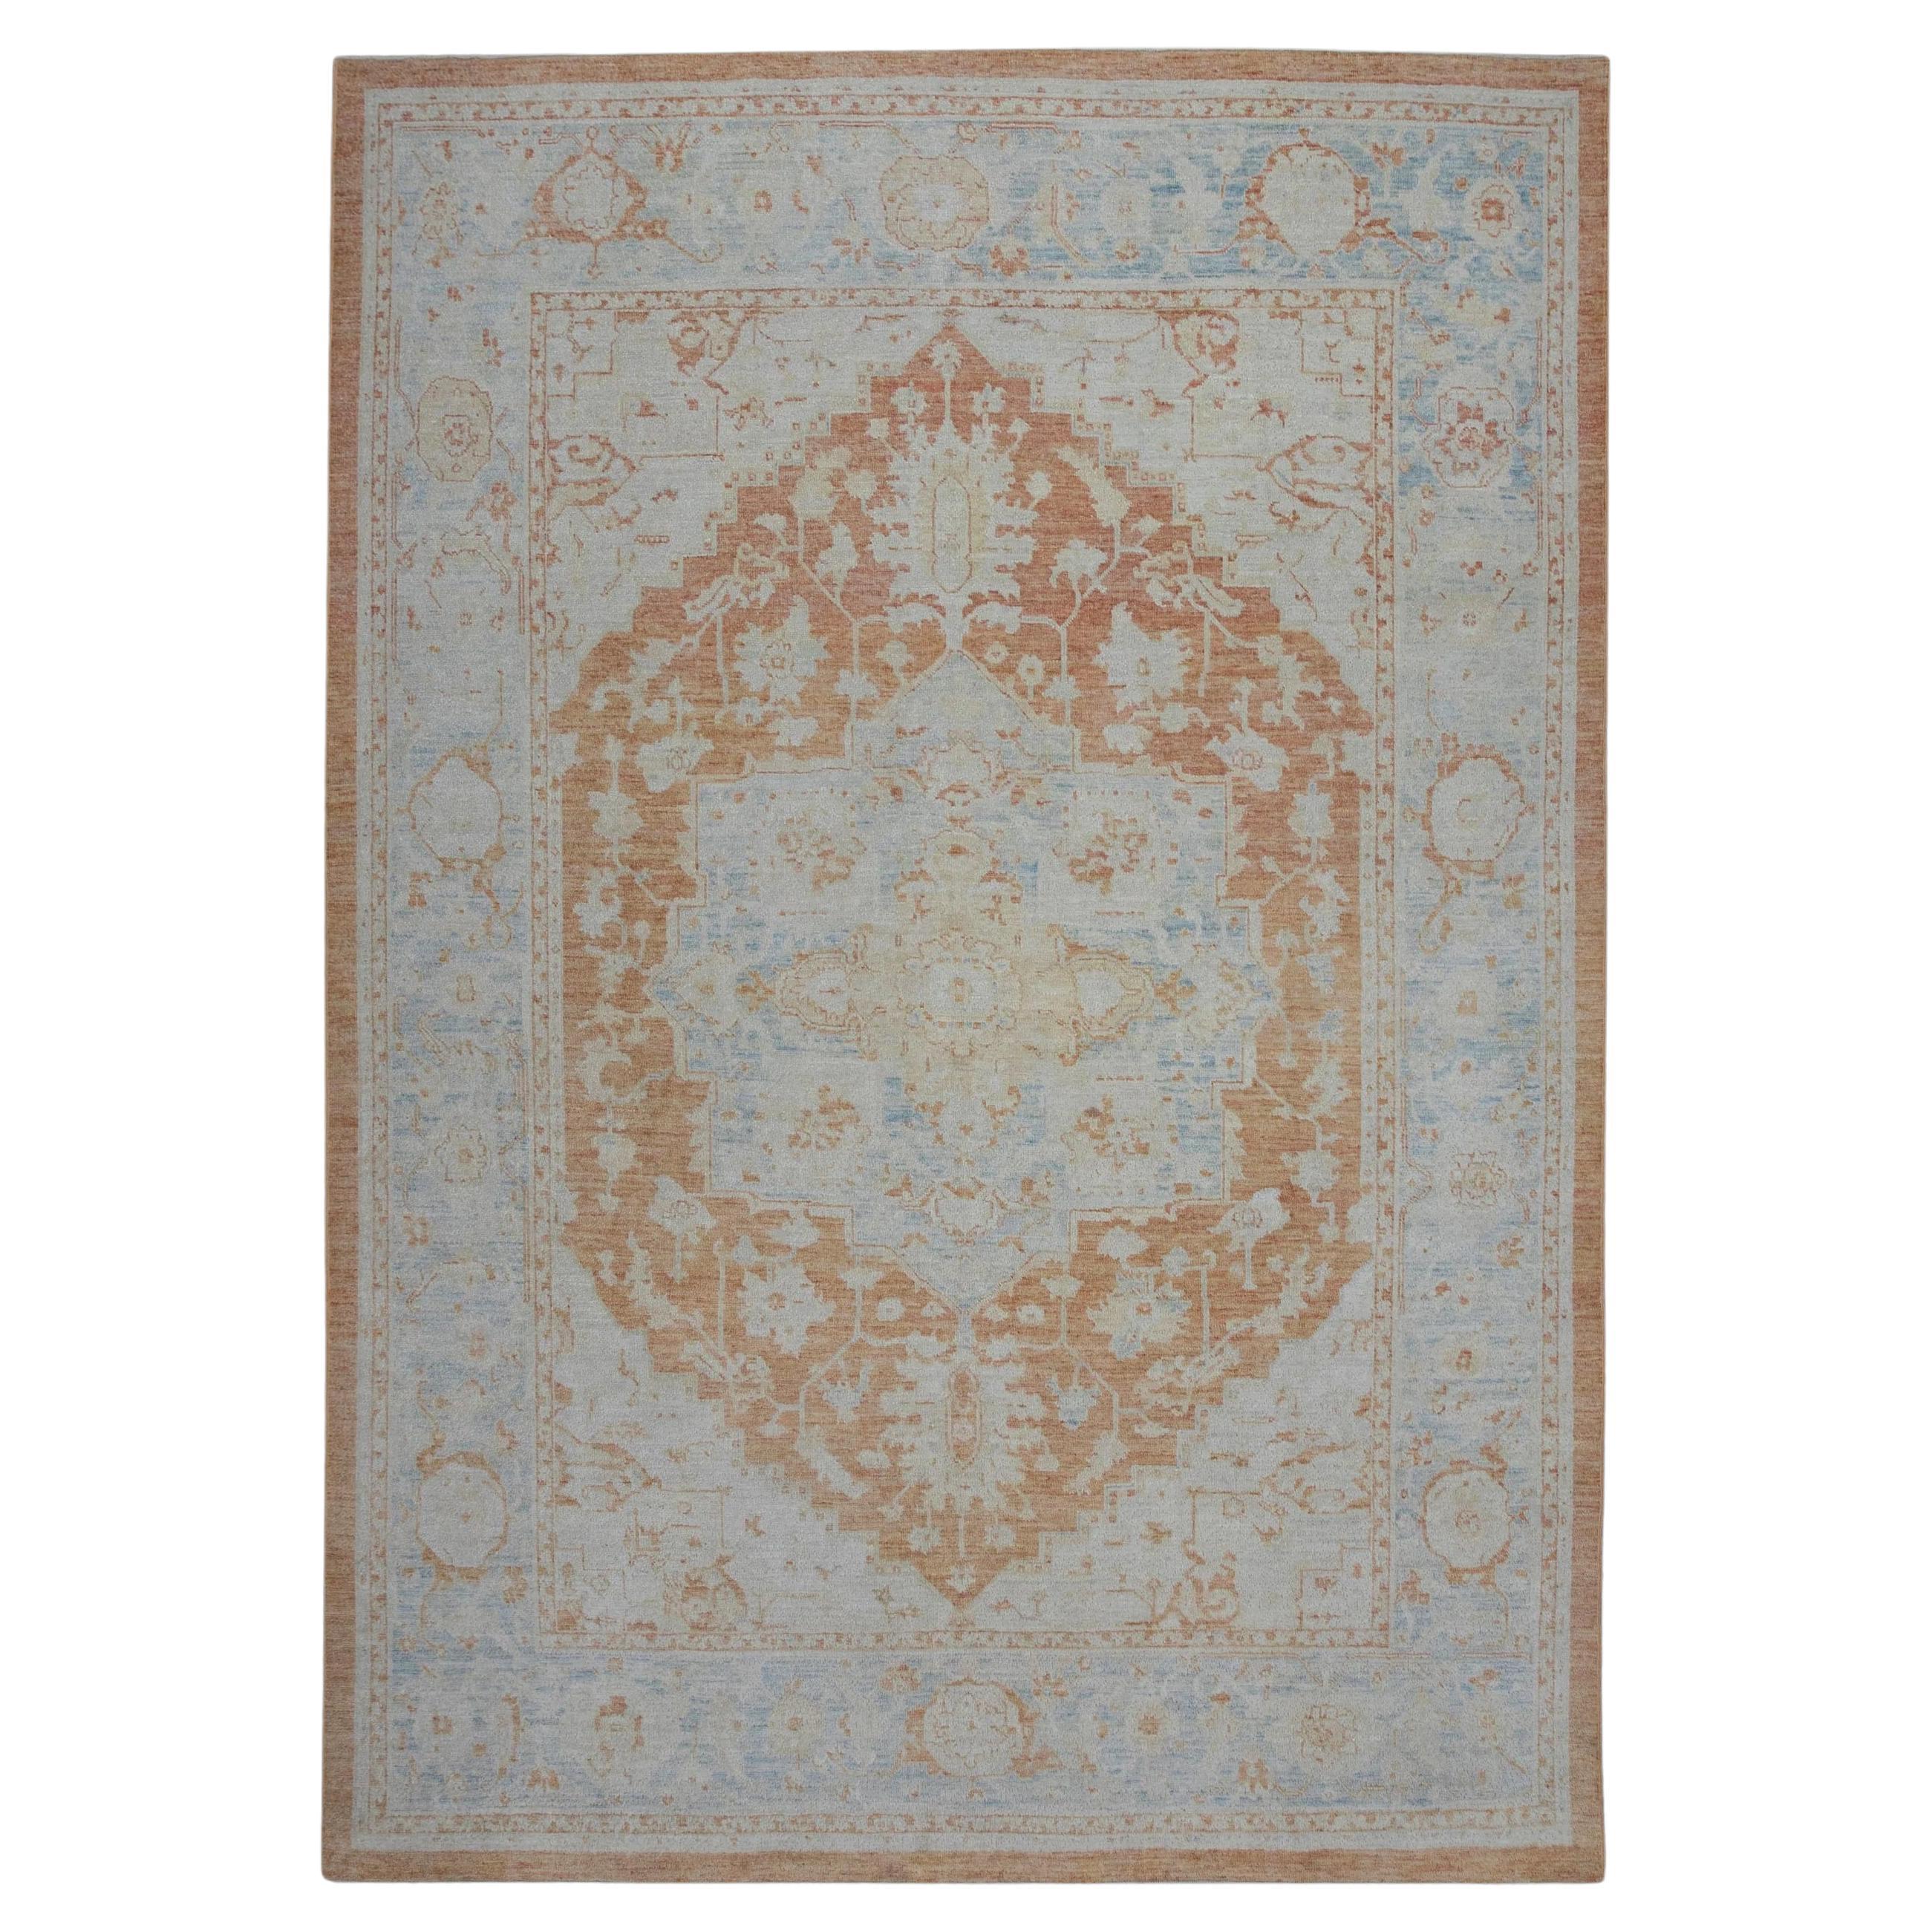 Floral Turkish Finewoven Wool Oushak Rug in Baby Blue and Salmon 7'9" x 10'6"